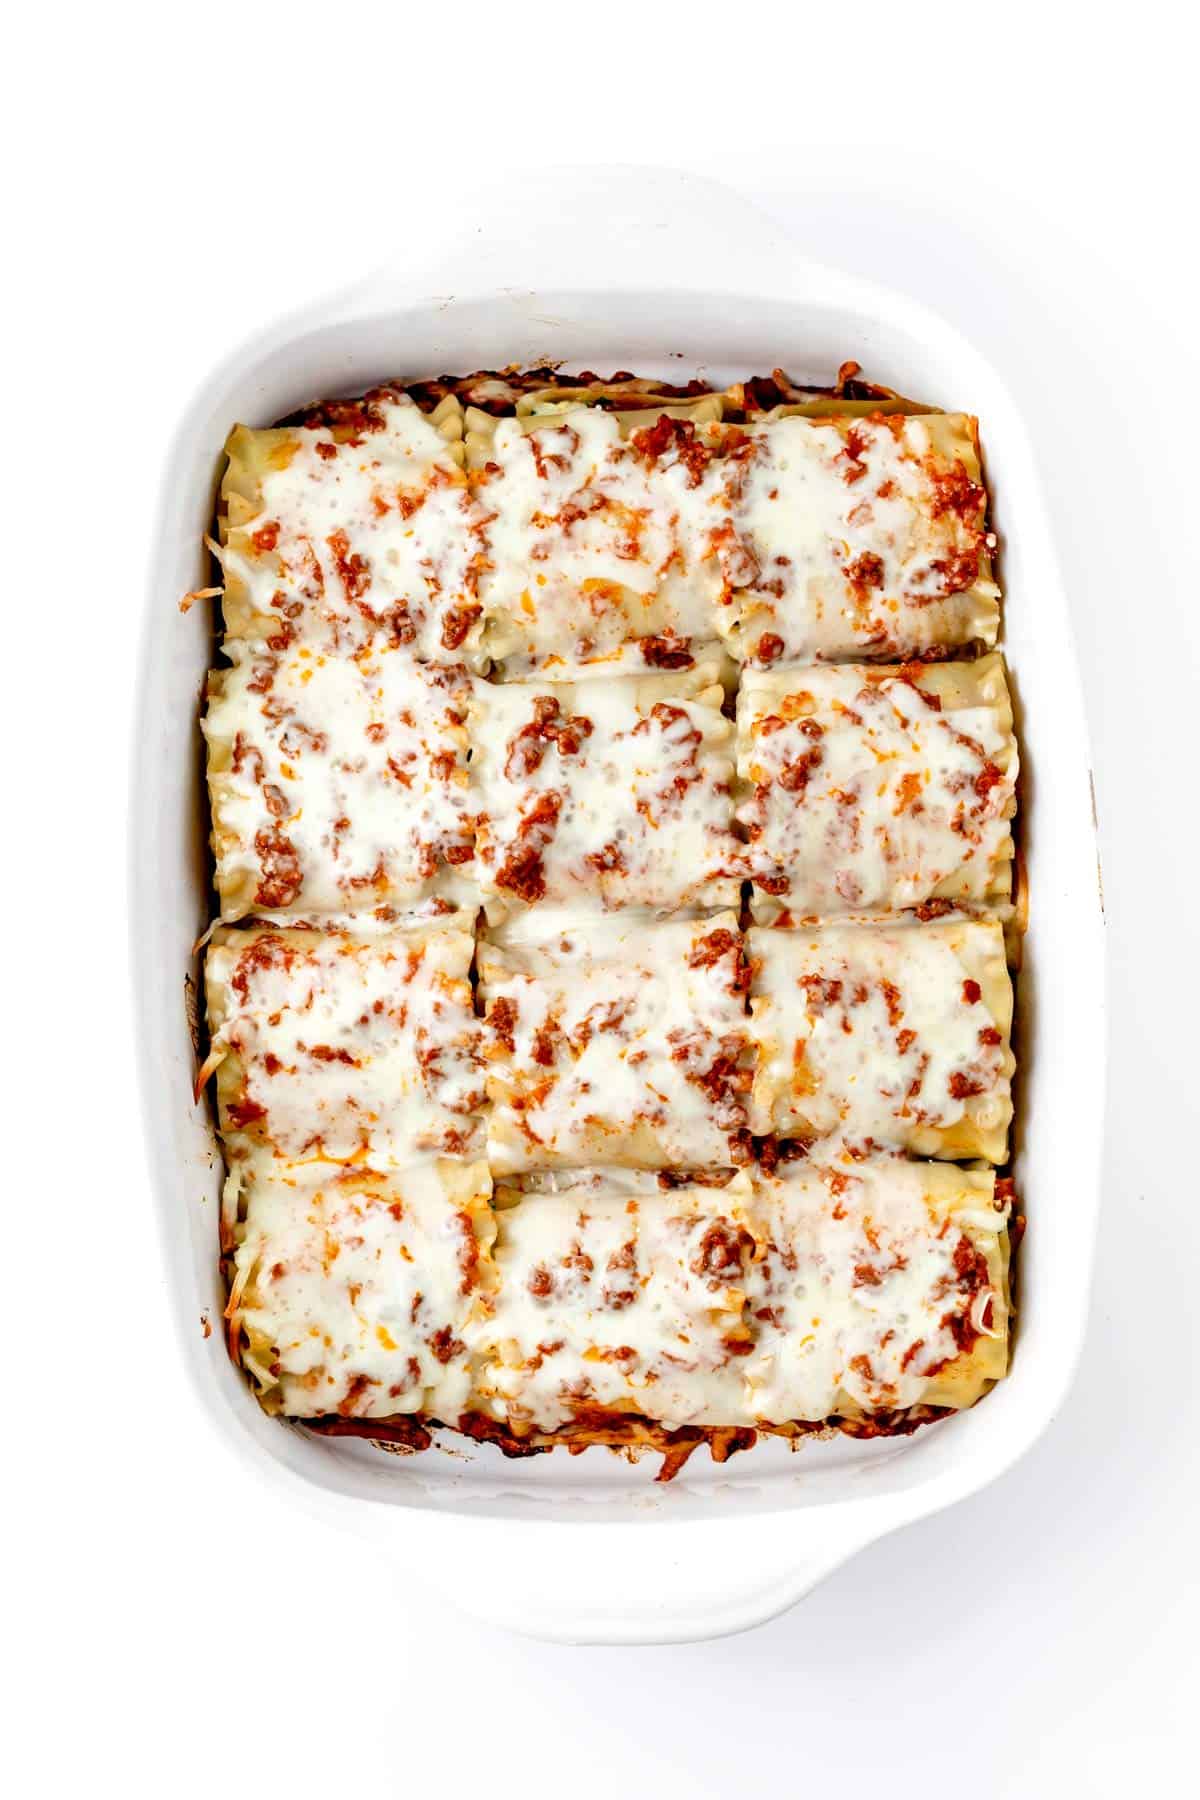 Lasagna rollups with melted cheese on top after baking.